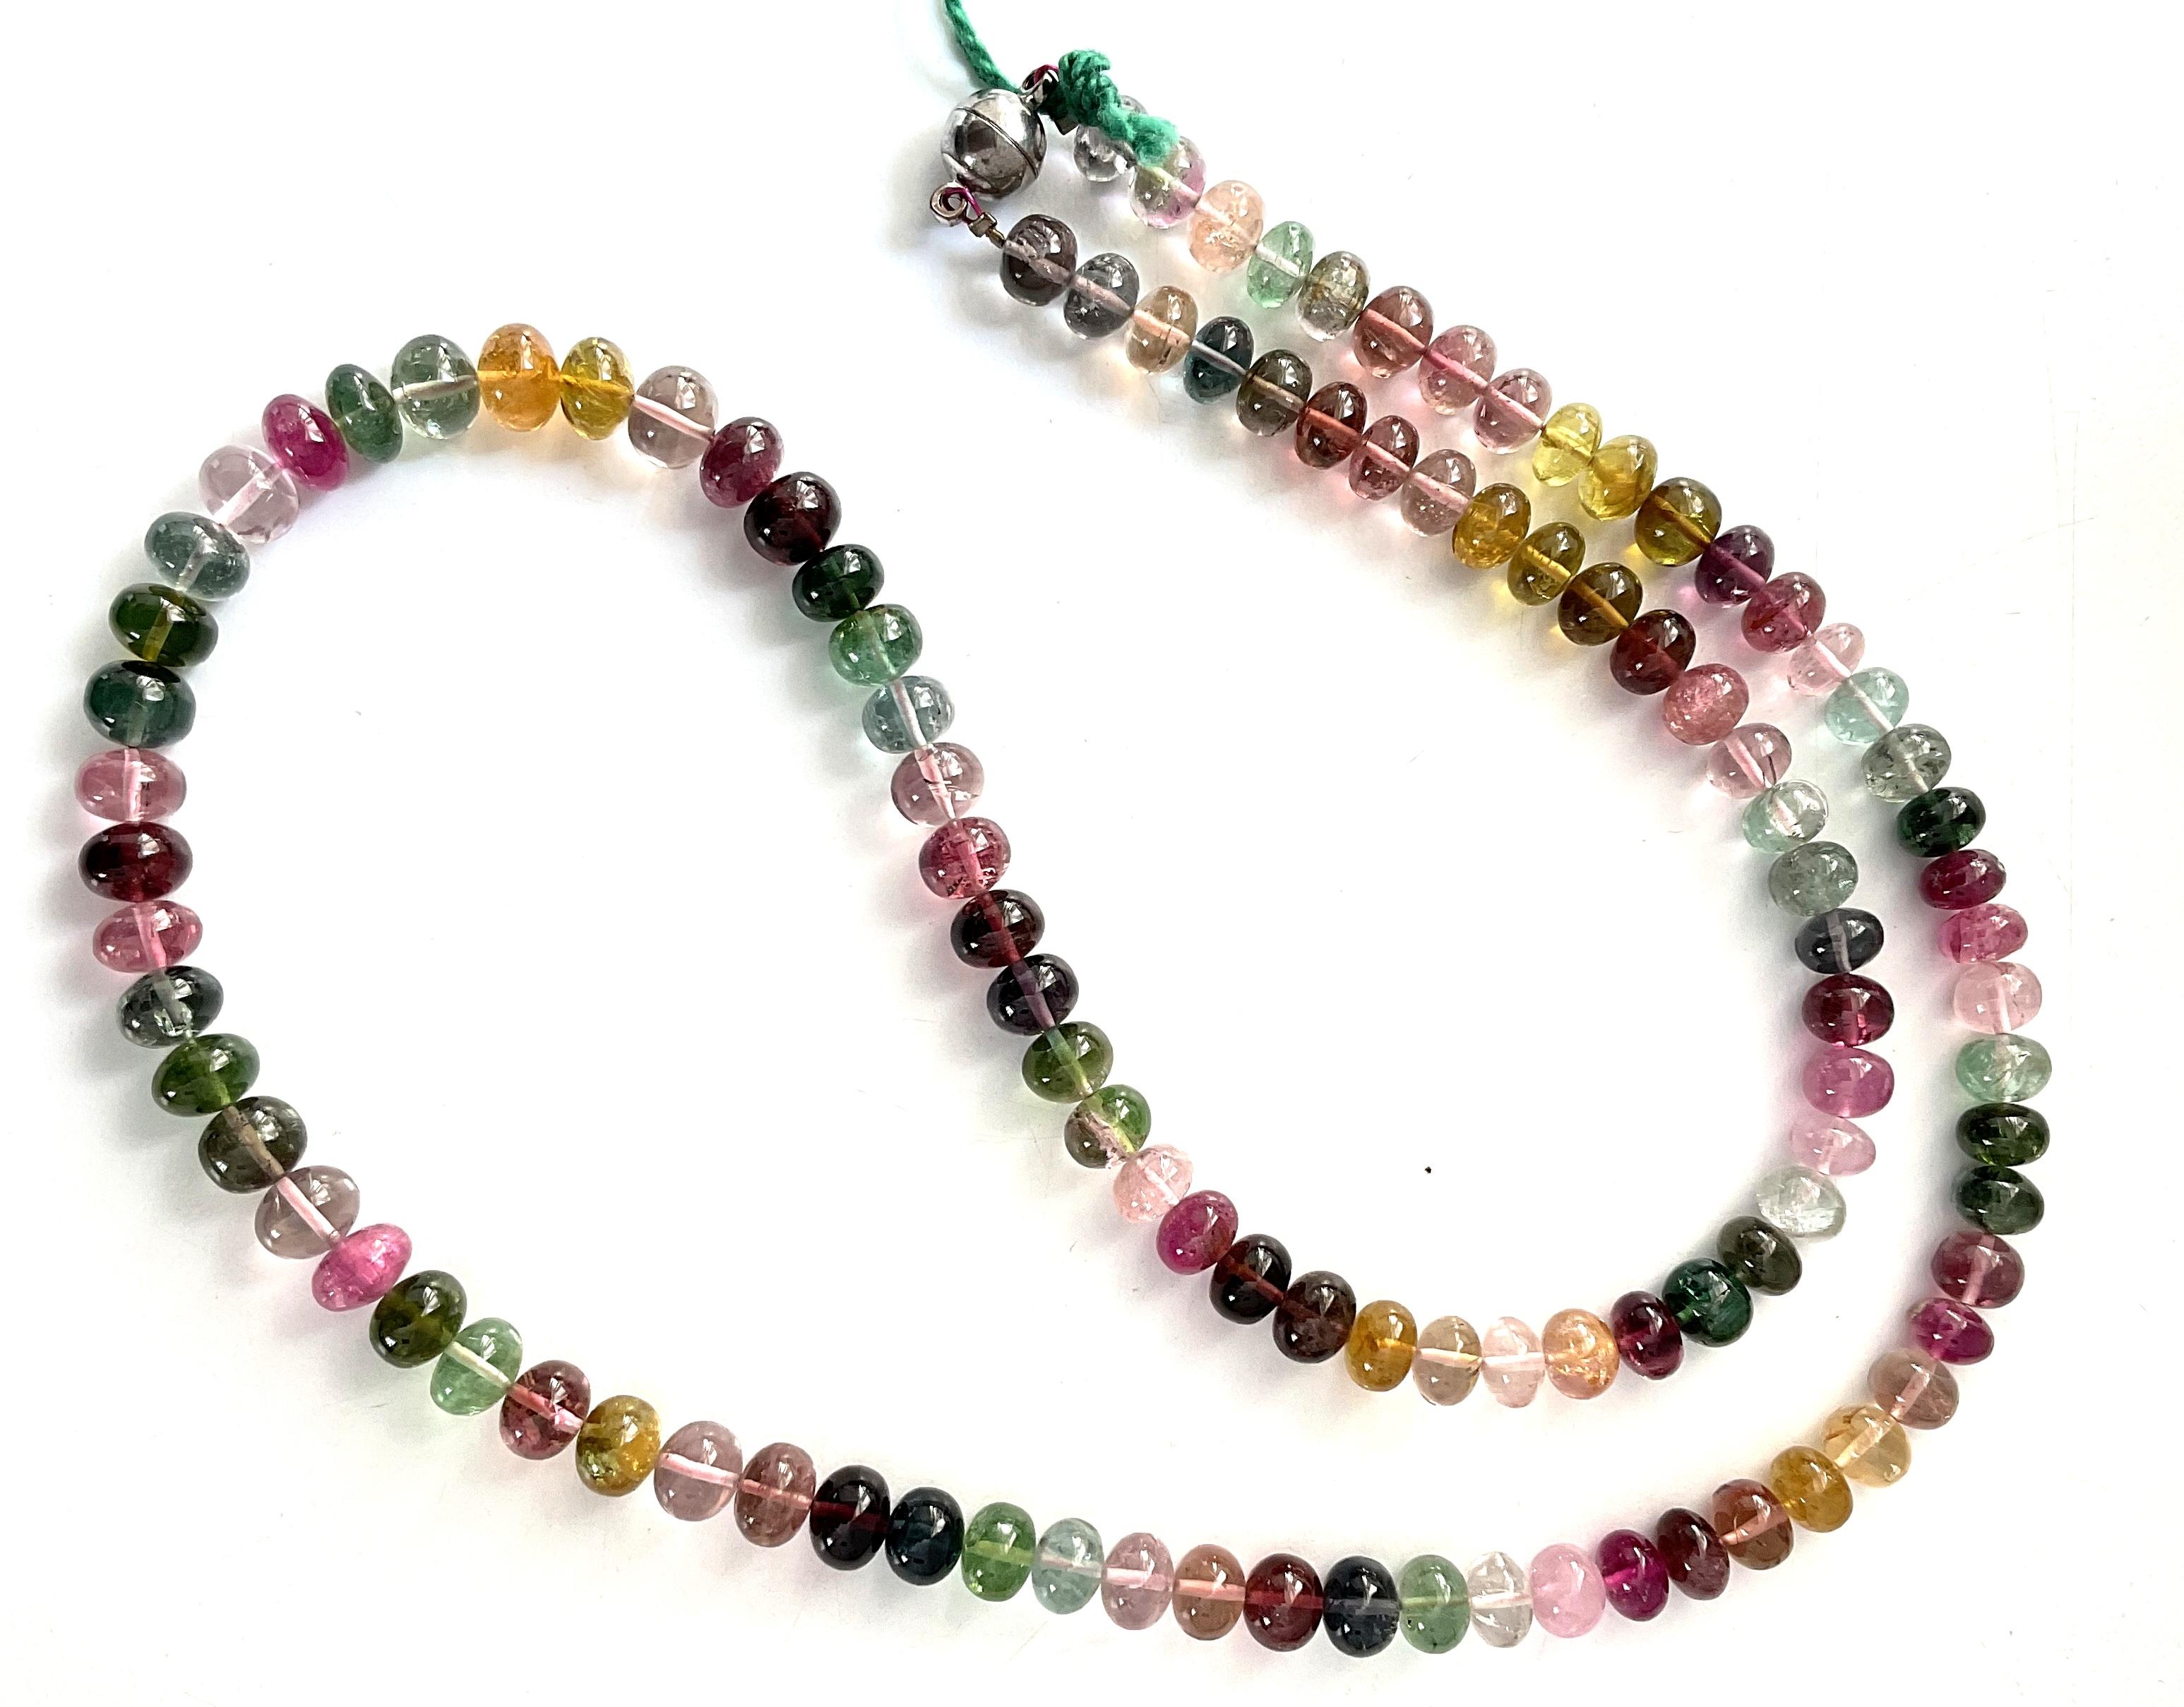 262.85 Carats Multi Tourmaline Smooth Beads Necklace For Fine Jewelry Natural Gemstone

Gemstone - Tourmaline
Size : 7 MM 
Weight : 262.85 Carats
Strand - 1

